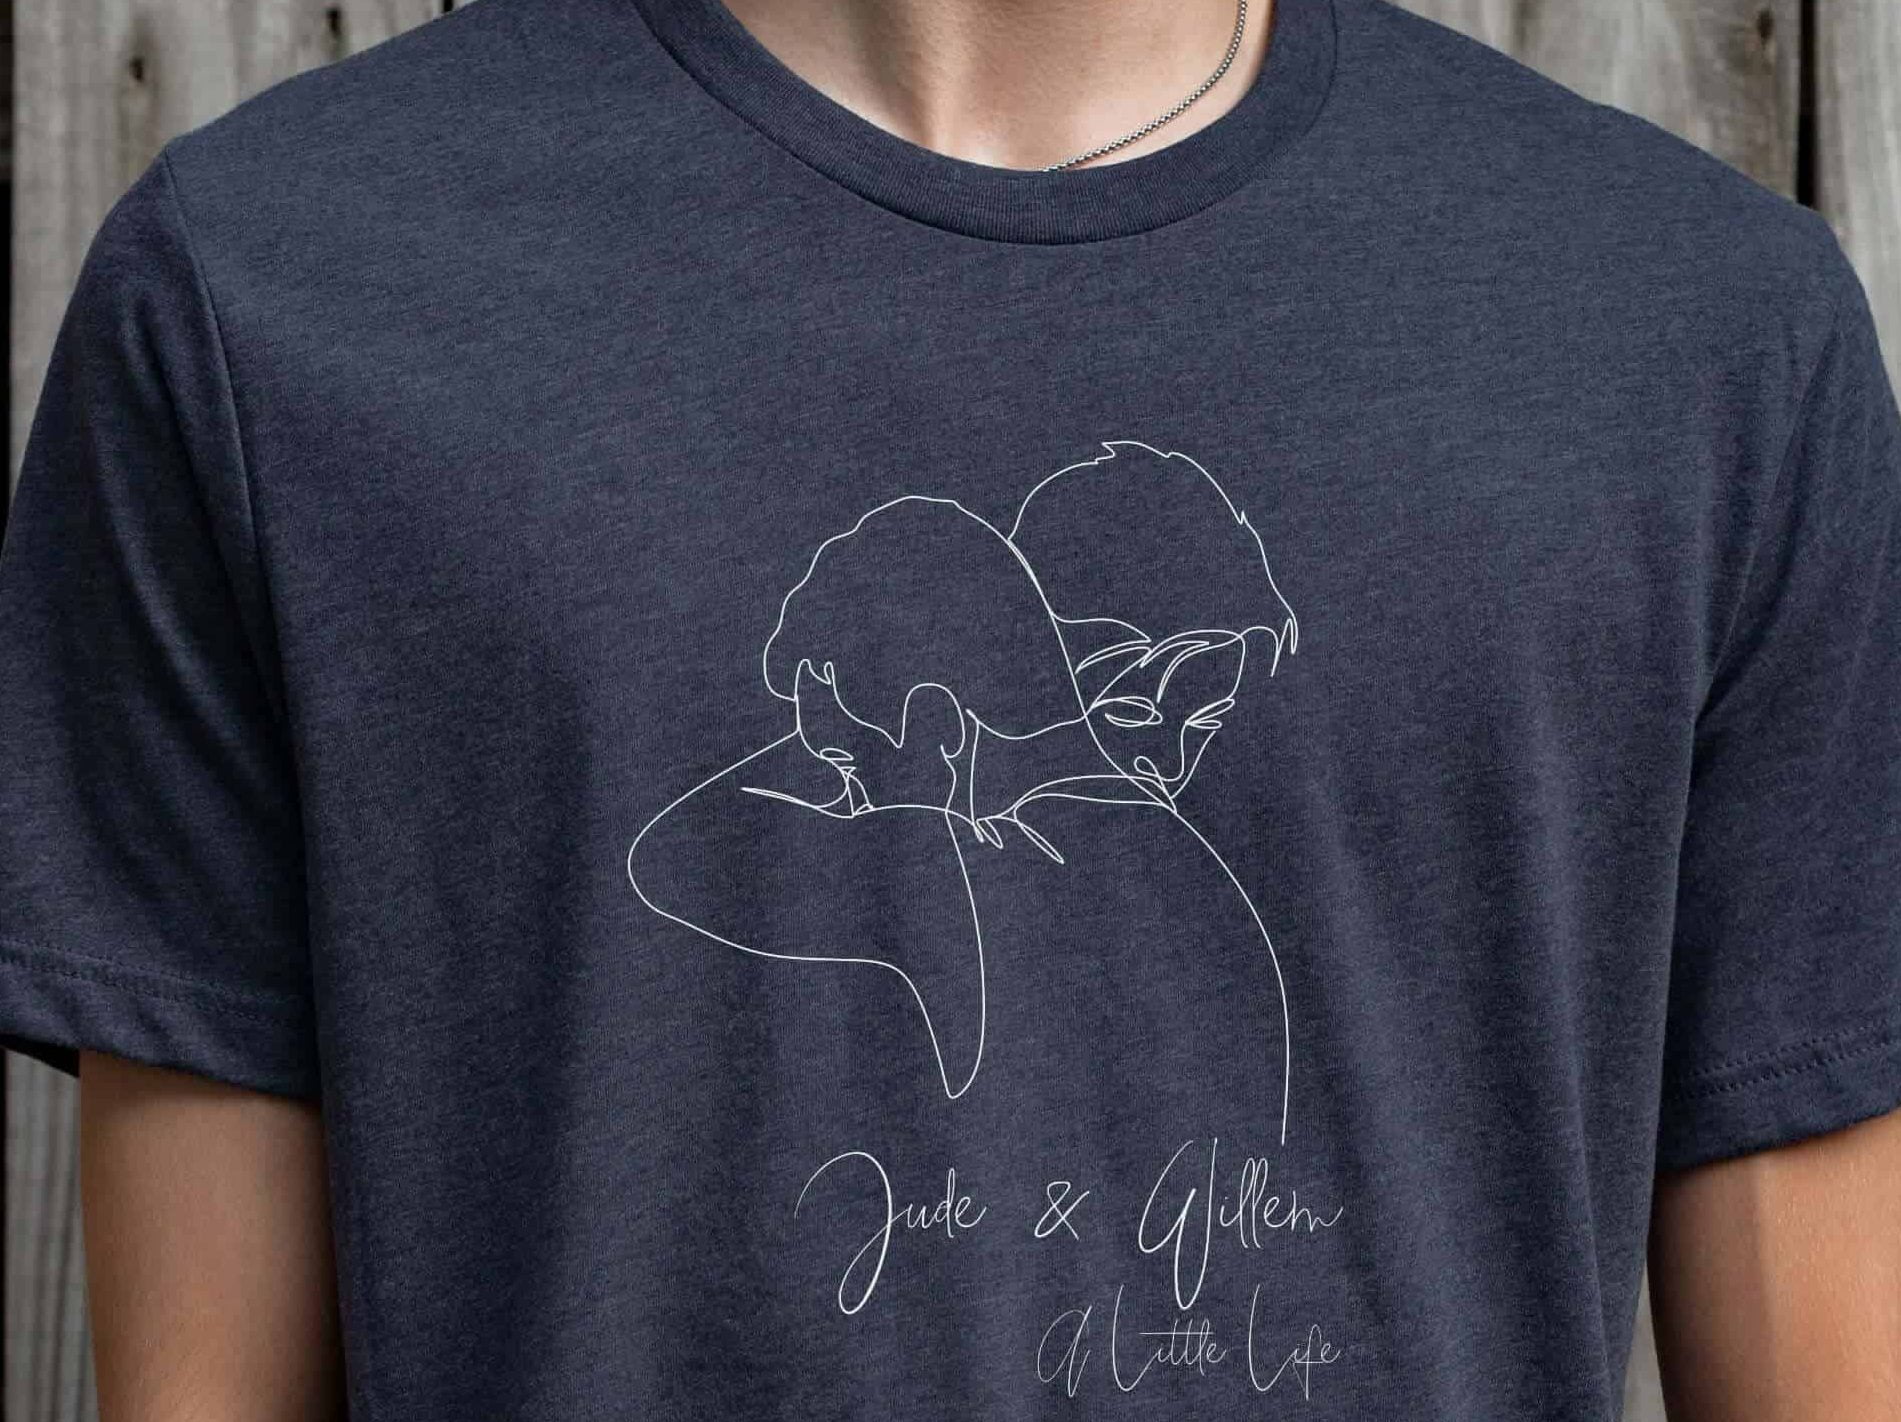 Man wearing a navy tshirt with a line drawing of two men hugging, with a label reading Jude and Willem, A Little Life